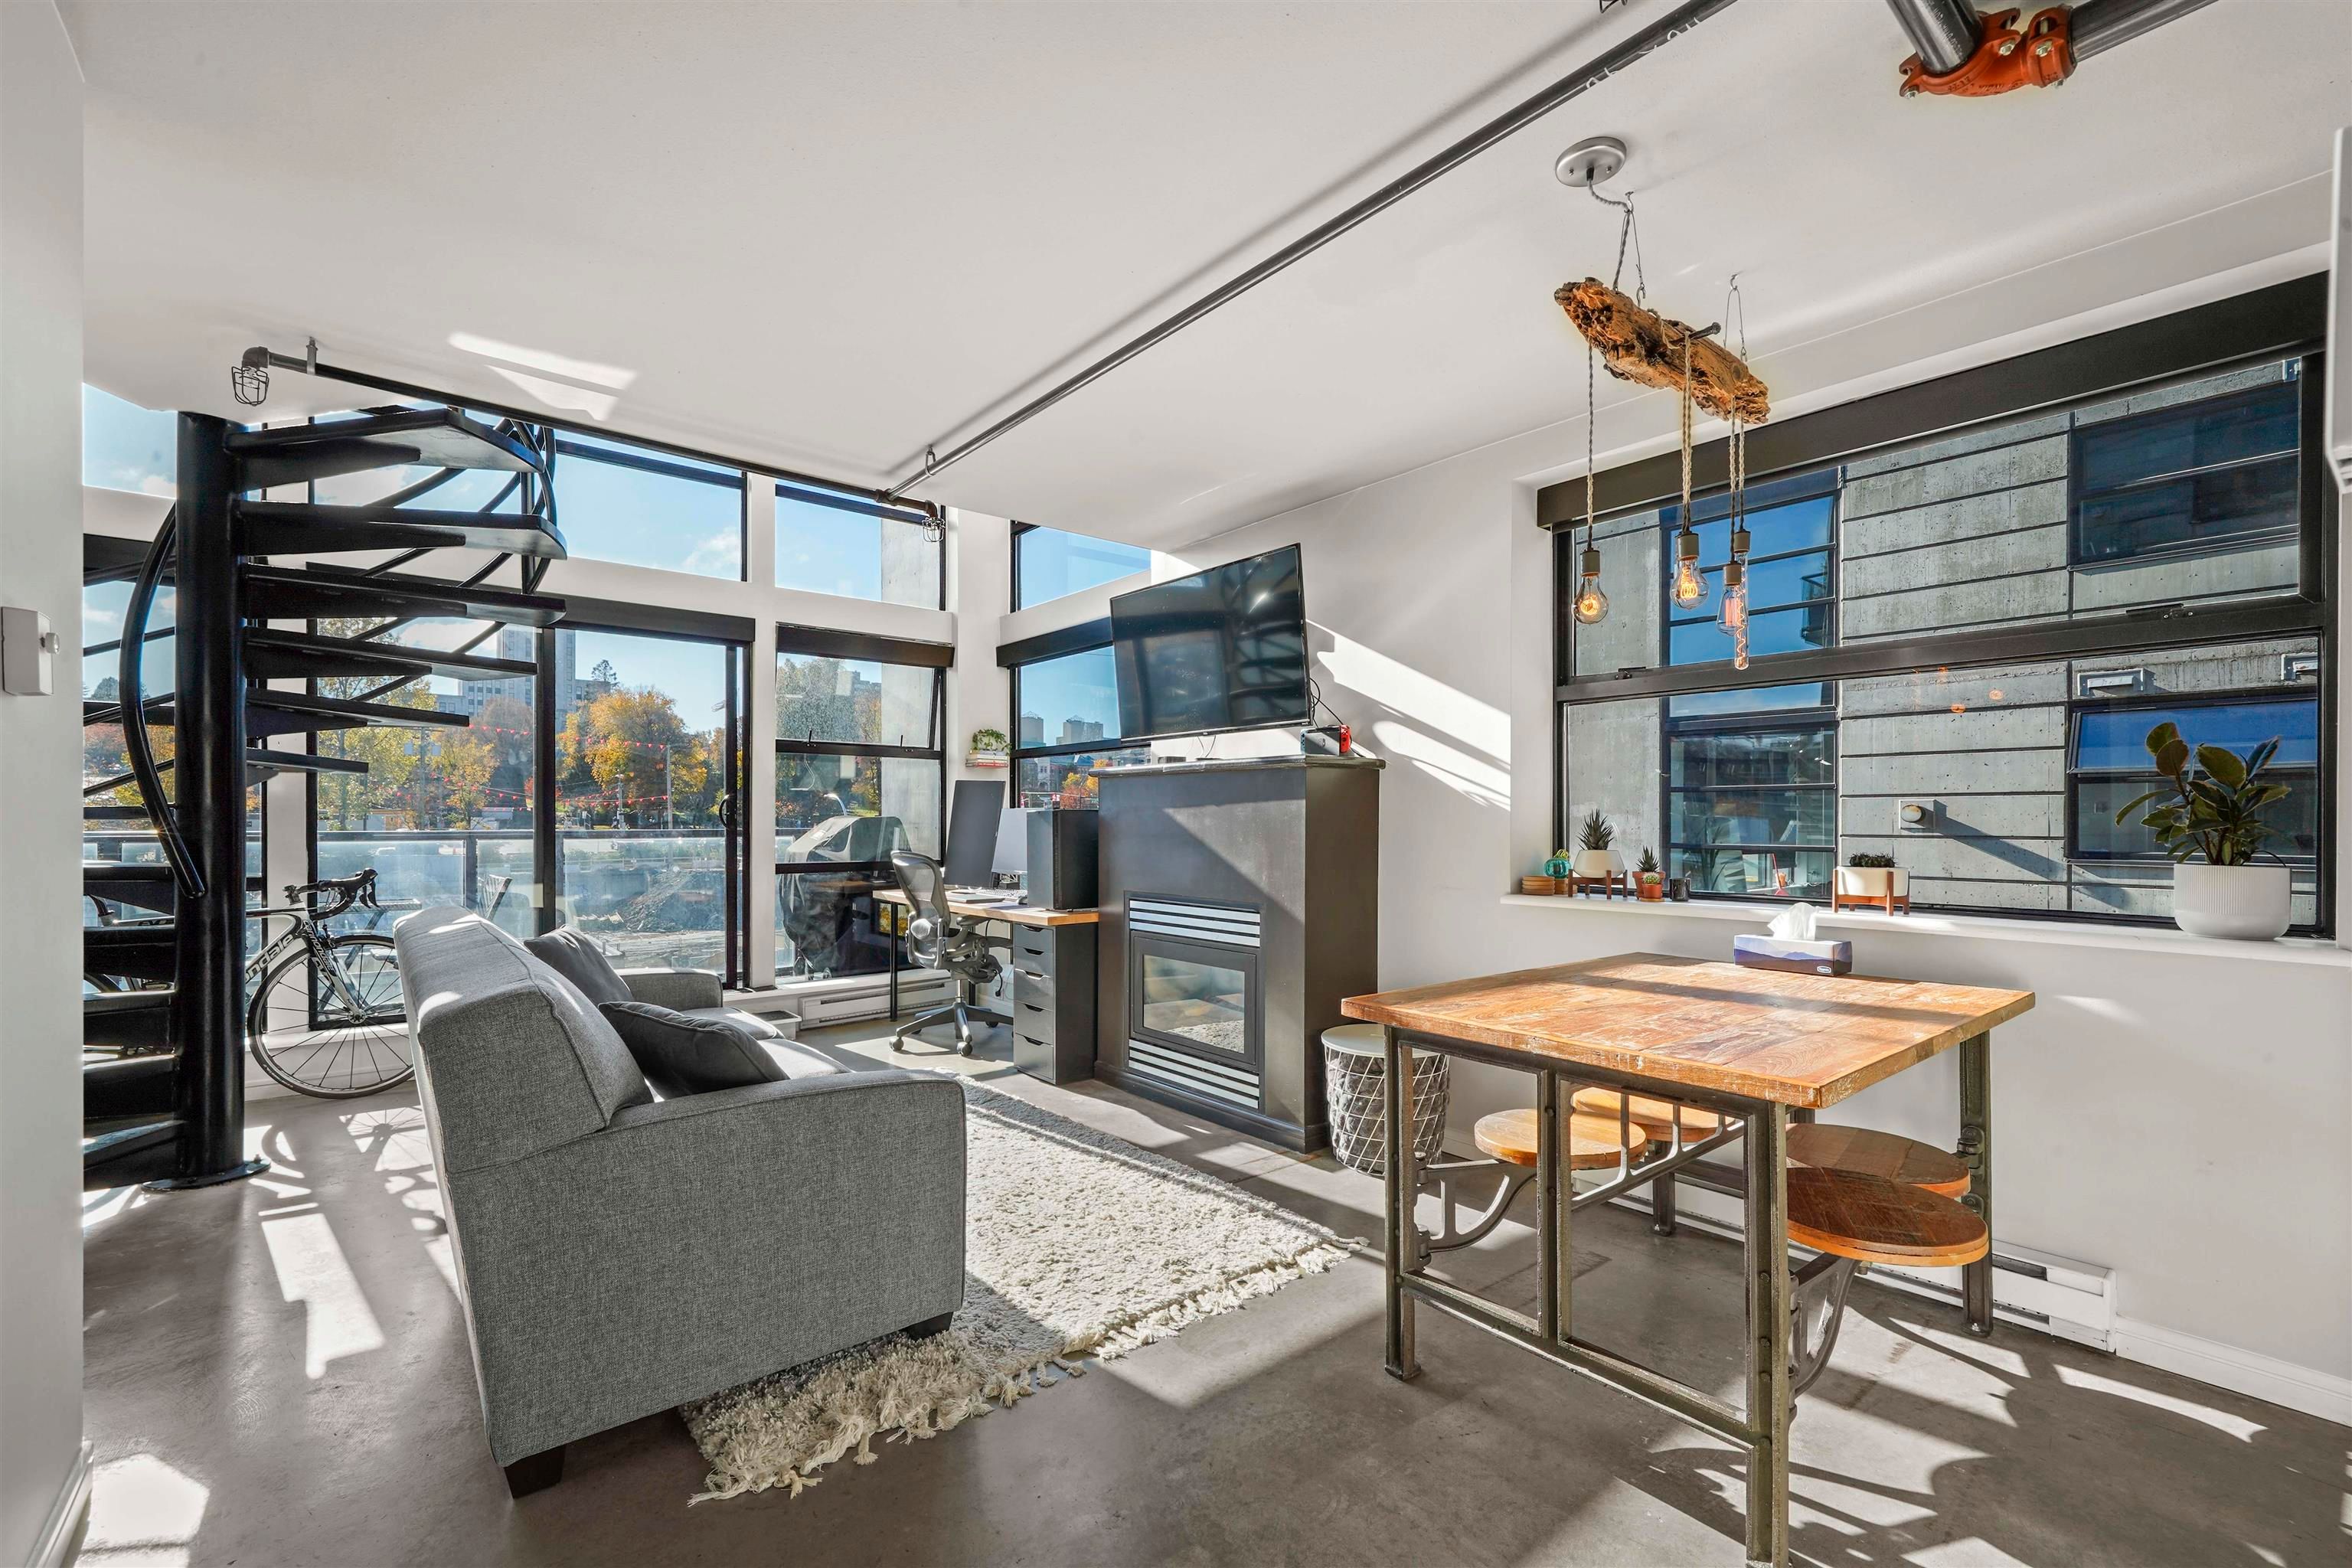 Main Photo: 518 428 W 8TH Avenue in Vancouver: Mount Pleasant VW Condo for sale (Vancouver West)  : MLS®# R2630313